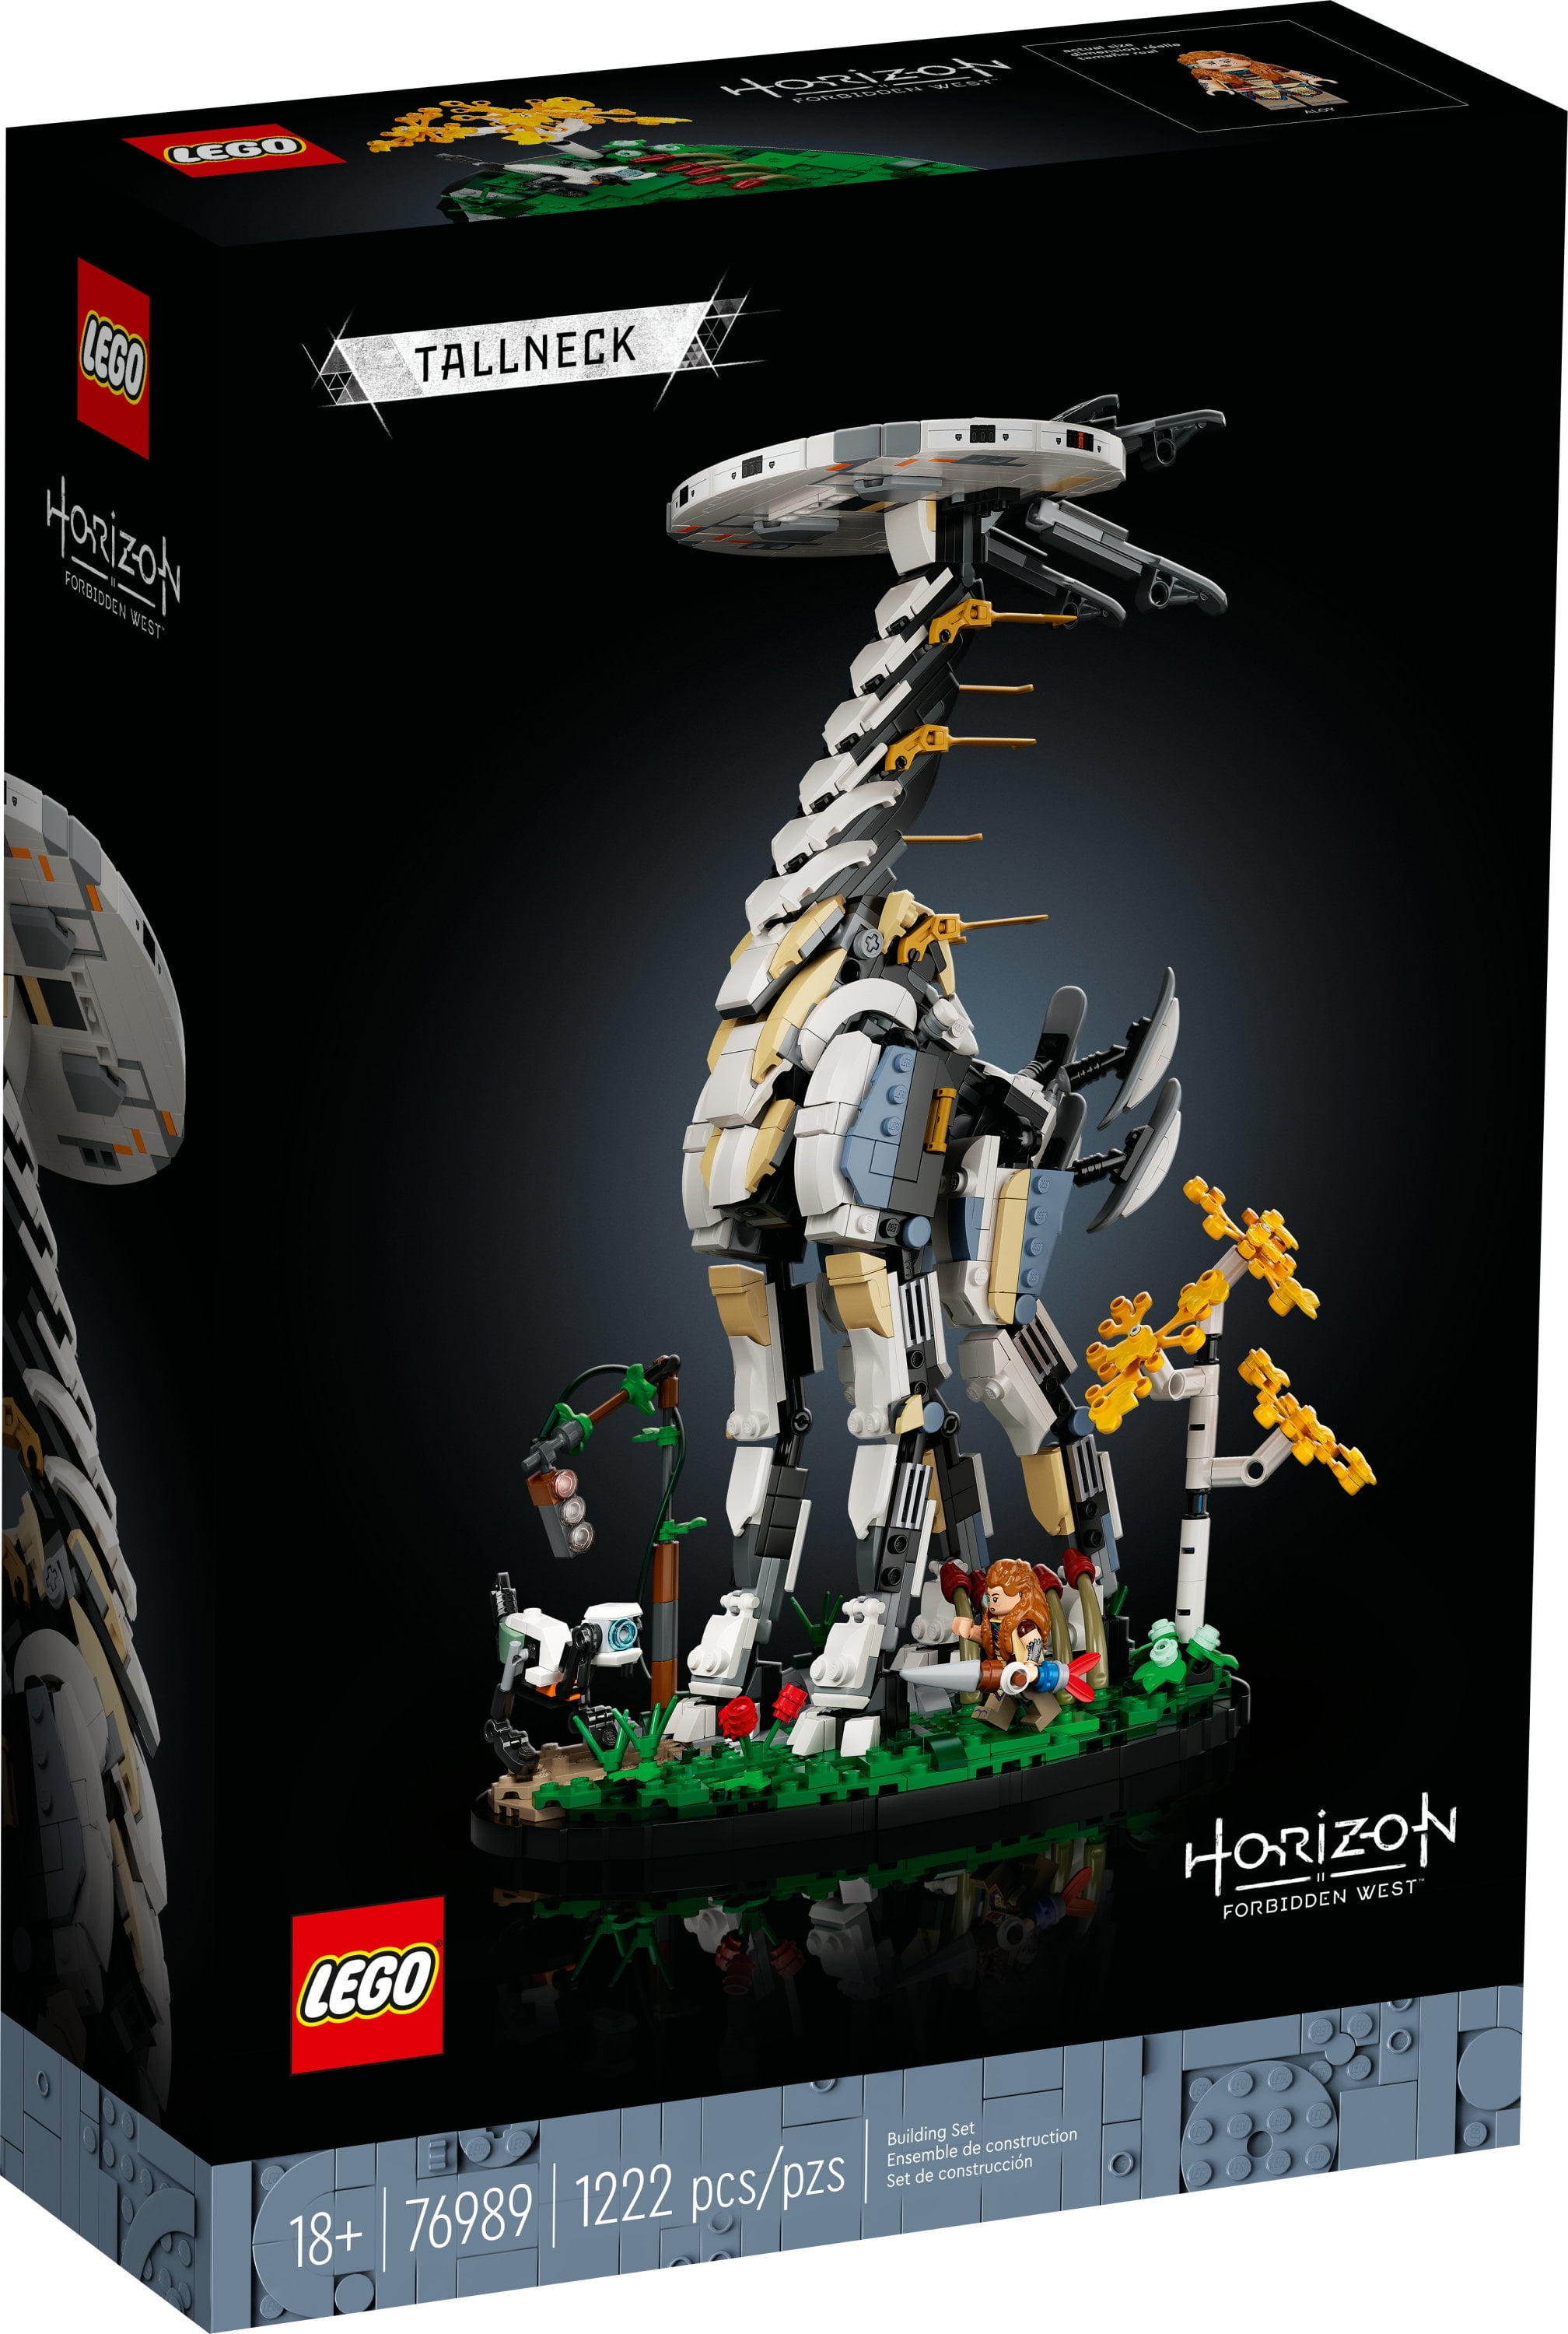 LEGO Horizon Forbidden West: Tallneck 76989 Building Set for Adults with  Aloy Minifigure & Watcher Figure, Collectible Gift Idea for Teens, Men